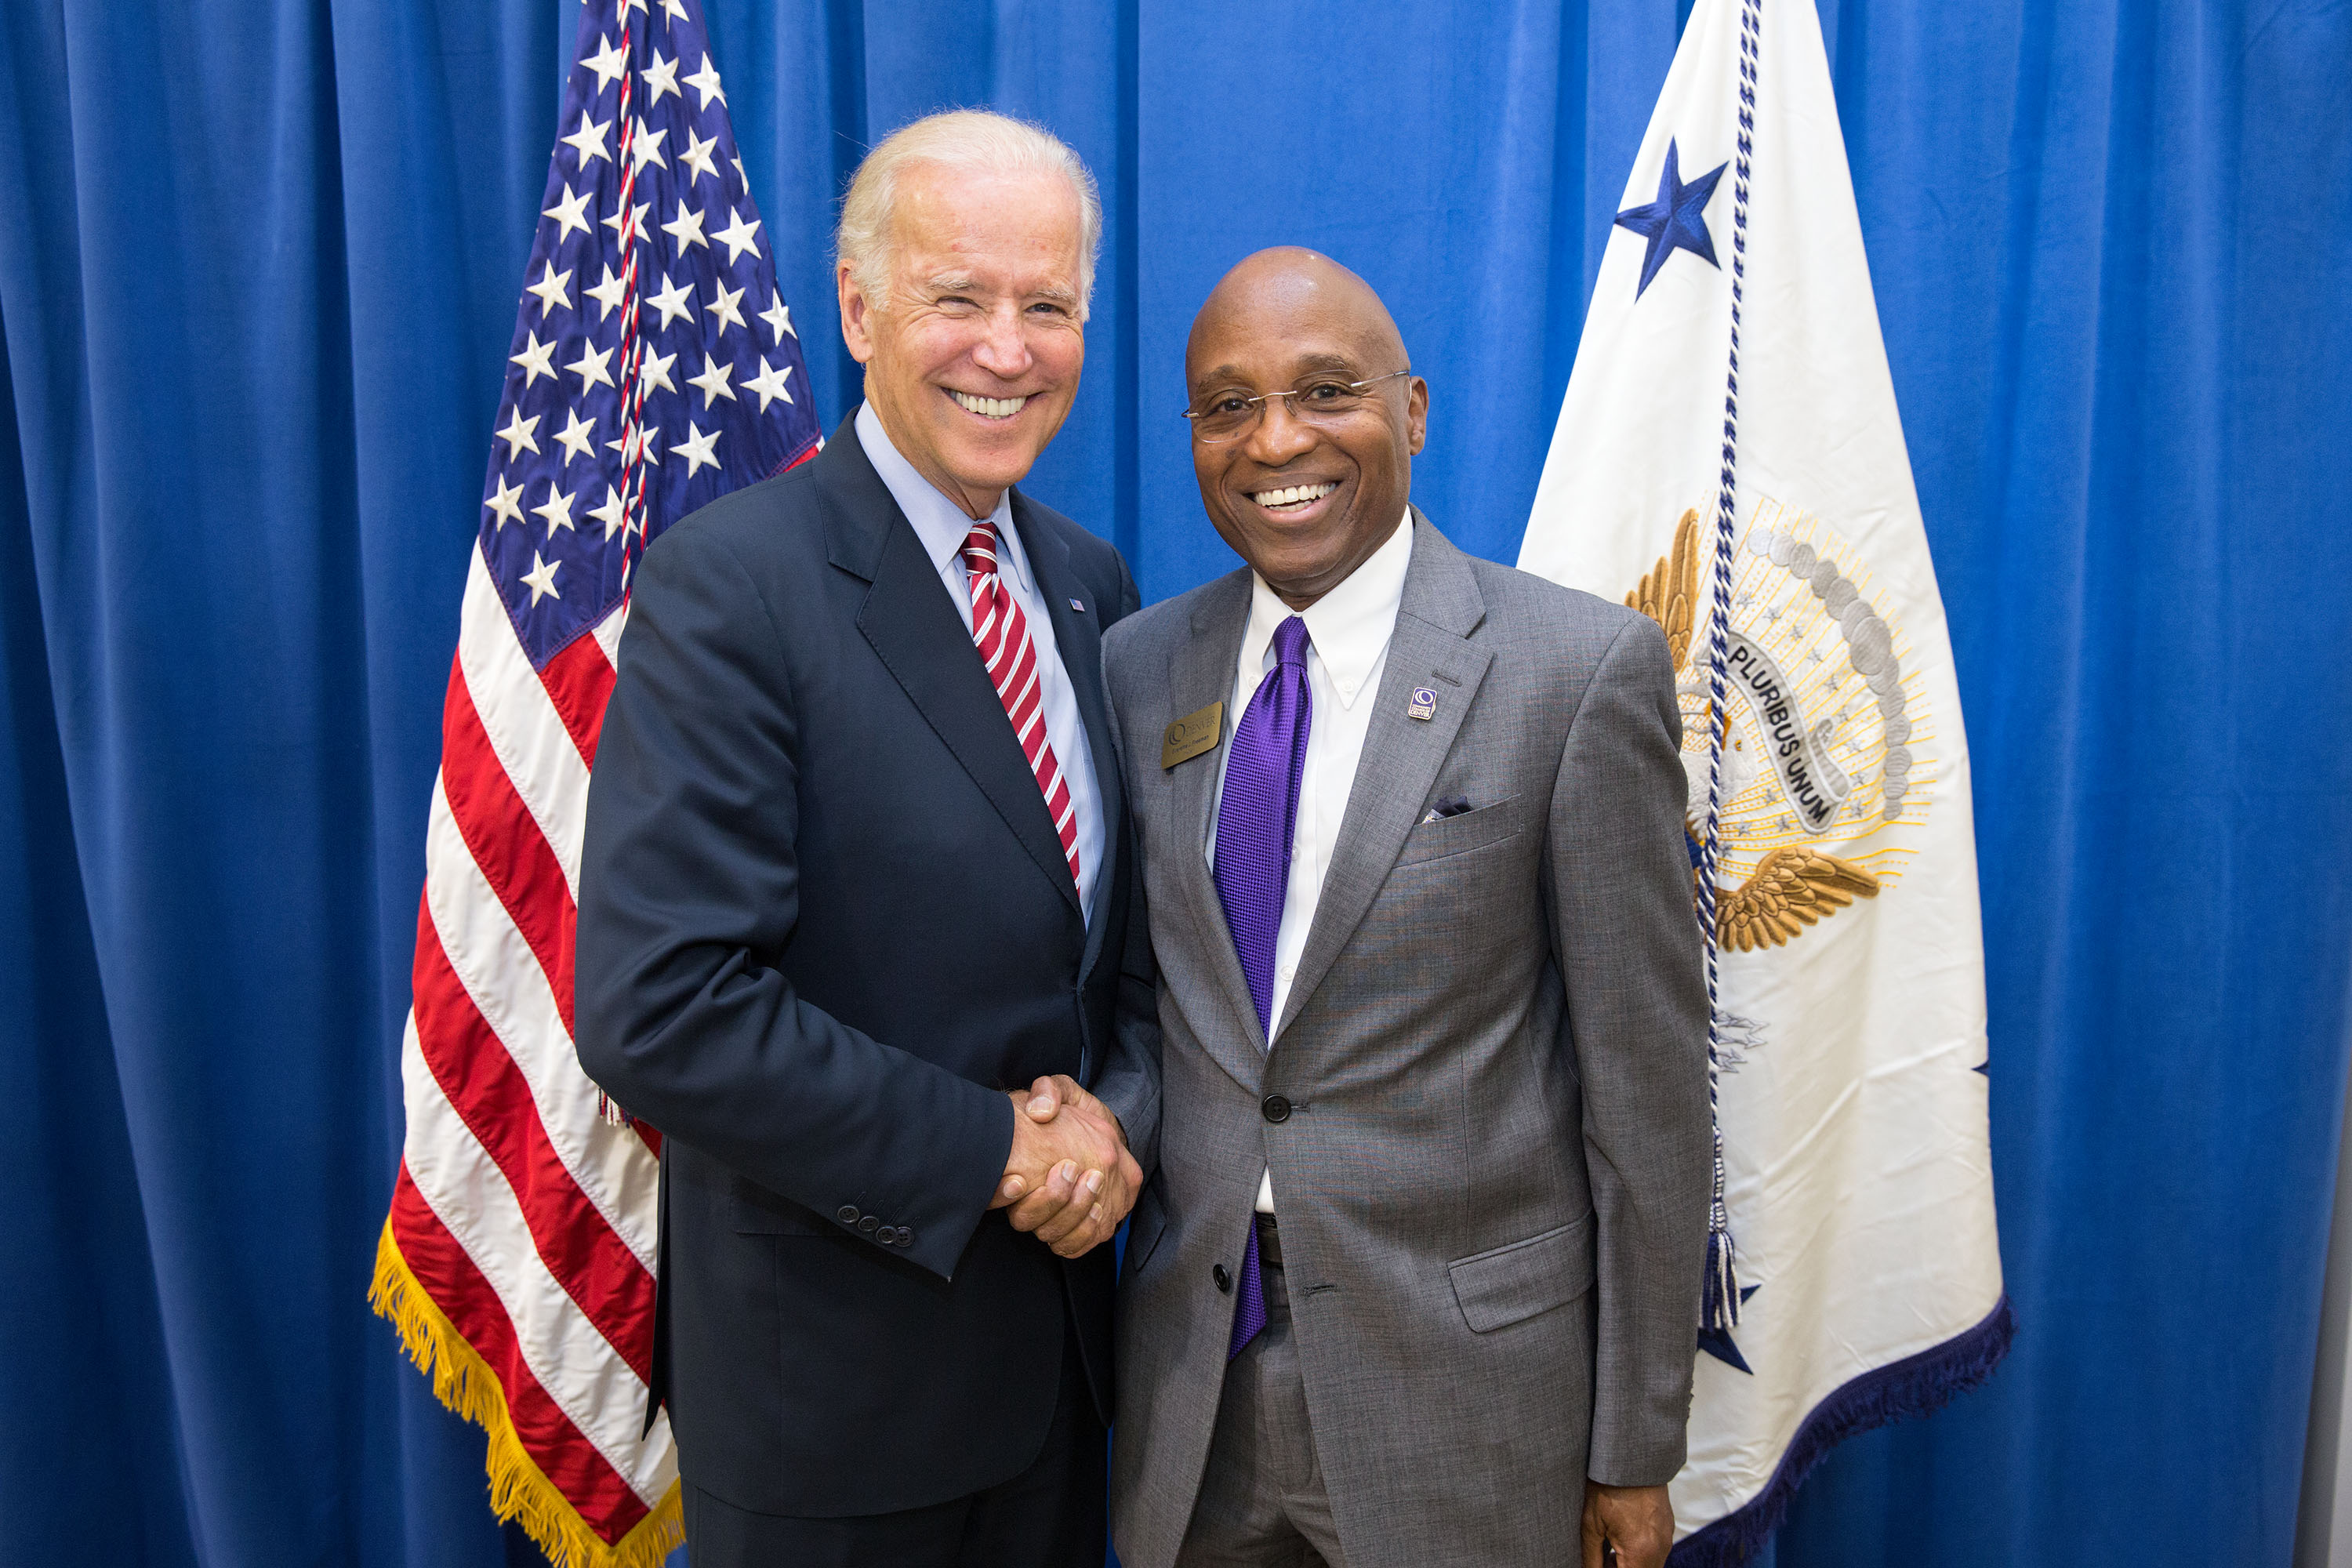 two men in suits shaking hands with American flag in background